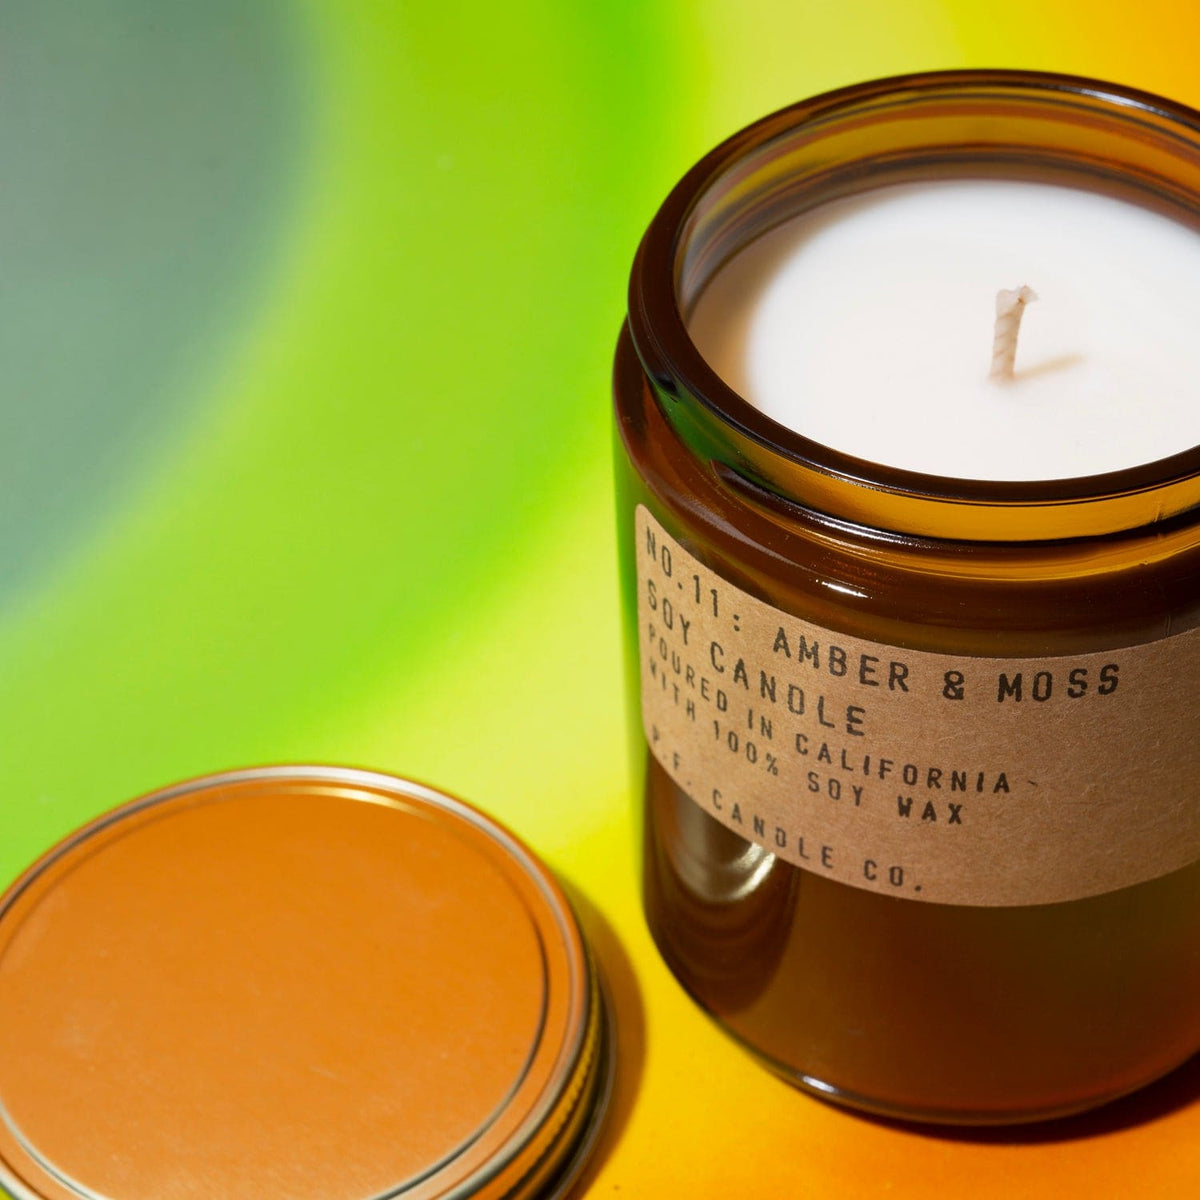 P.f. Candle Co. - Amber & Moss Candle - Candles - Earthy - 